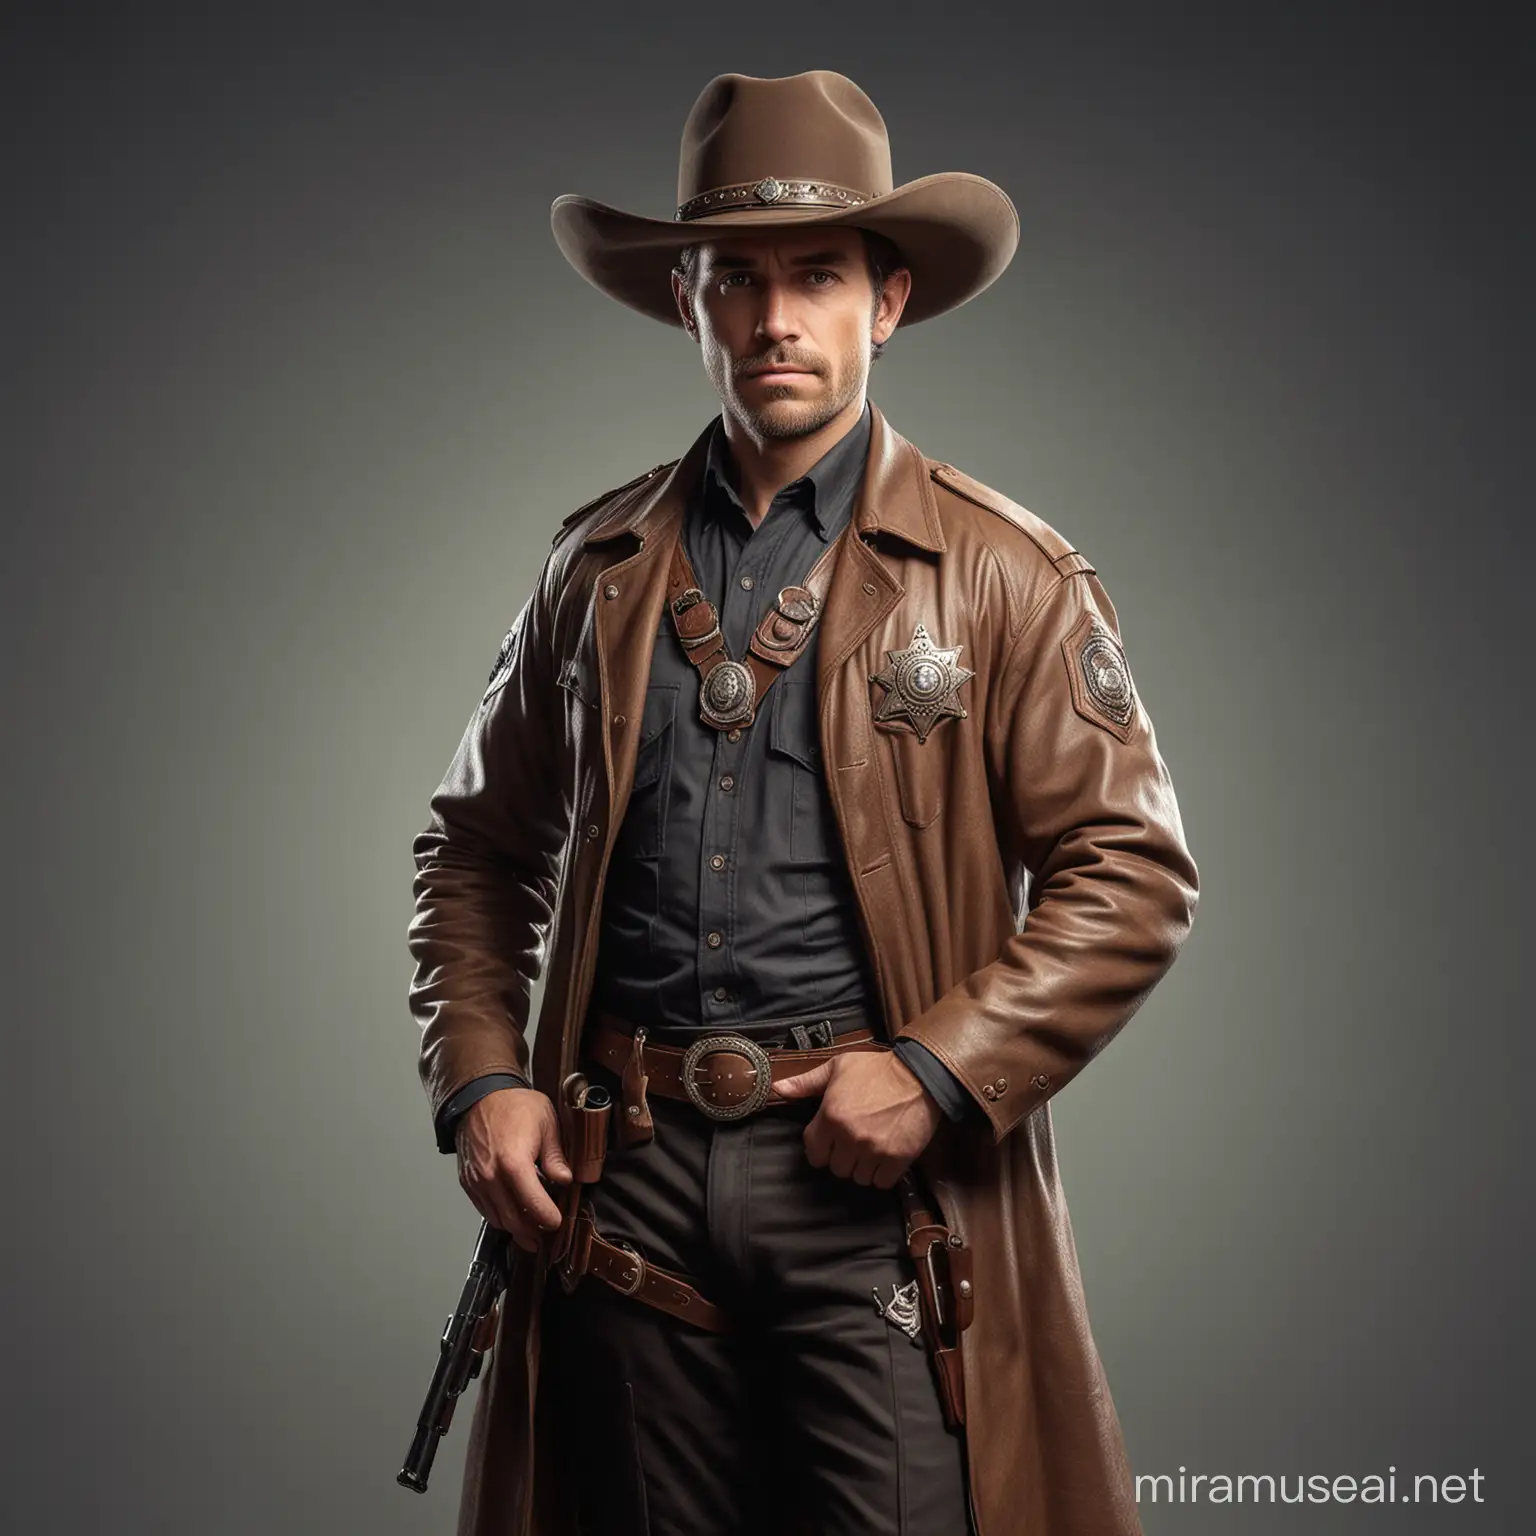 a handsome sheriff in western style, complete with a firearm, wearing a hat adorned with a large badge, standing at full height